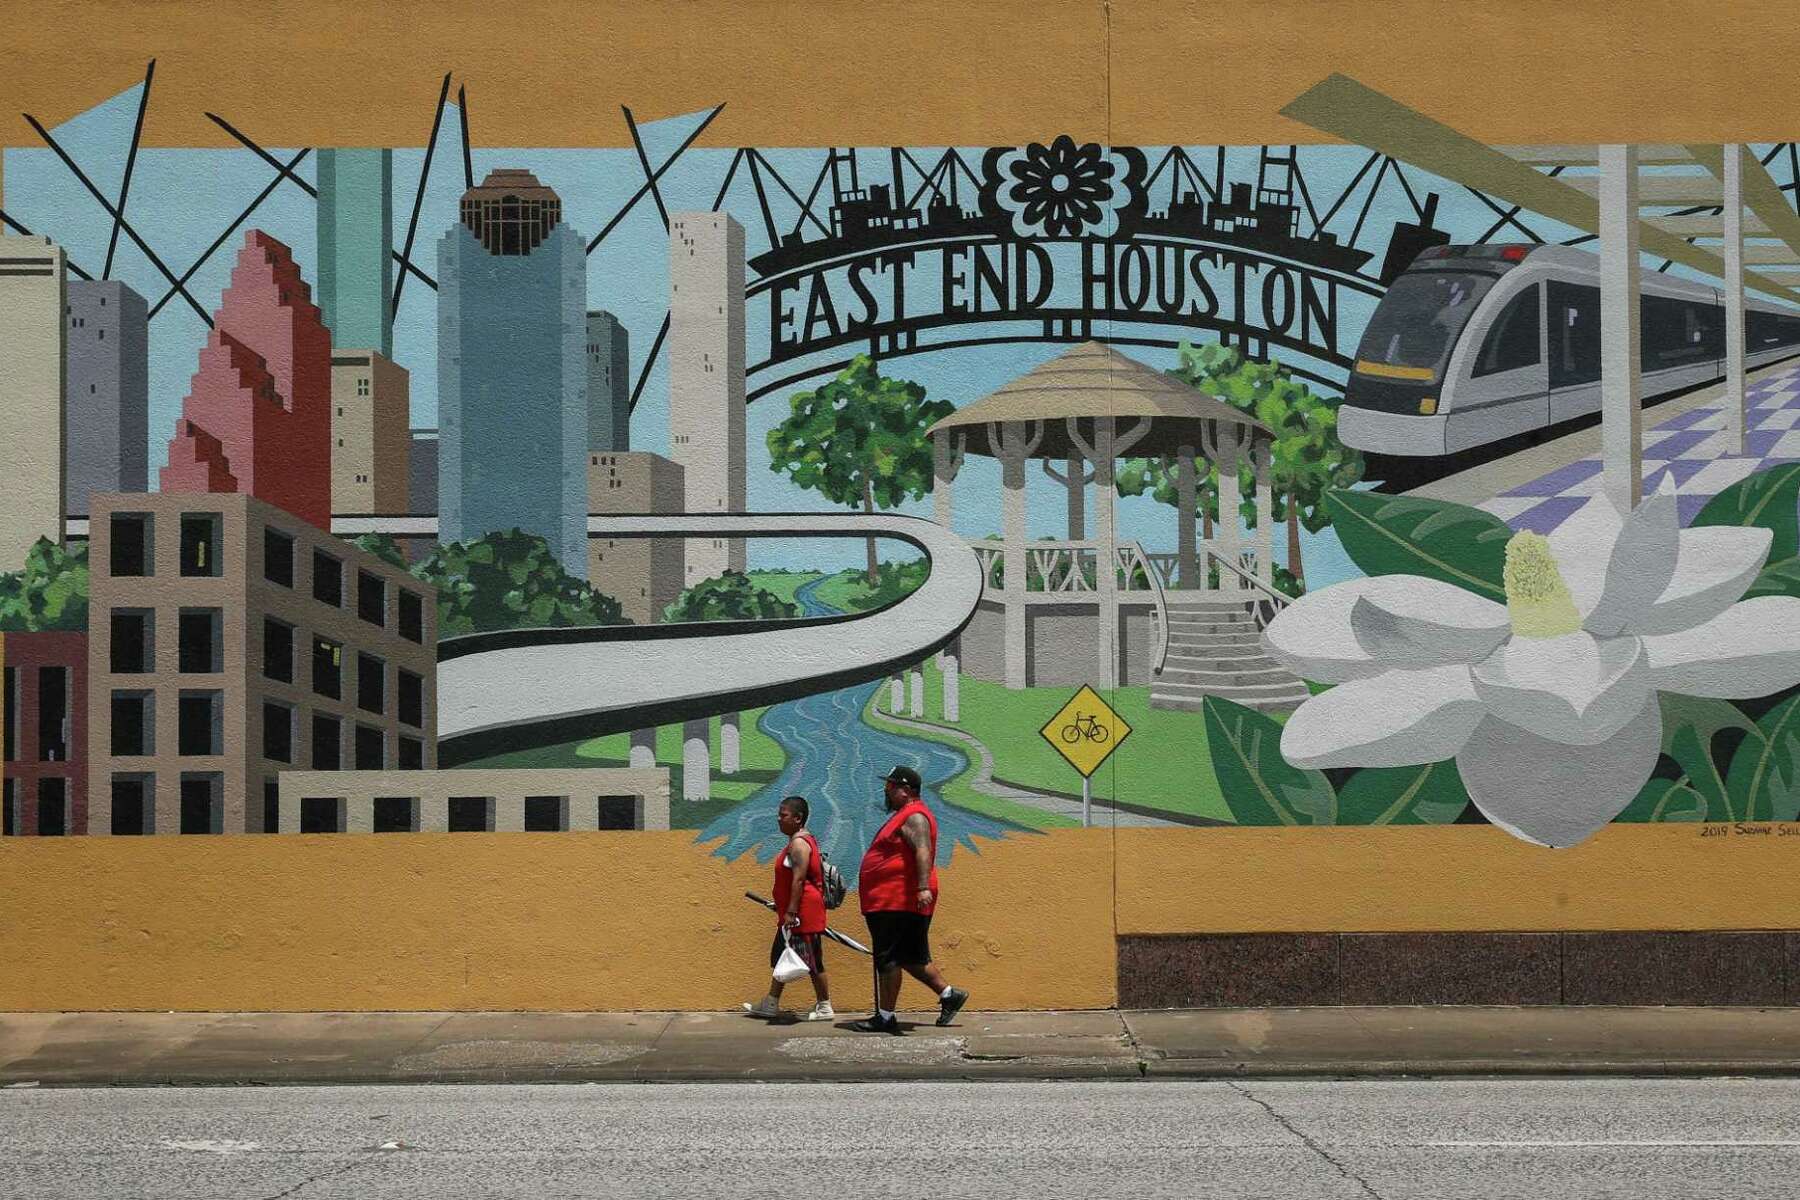 15 Facts About Art And Culture In Houston, Texas - Facts.net